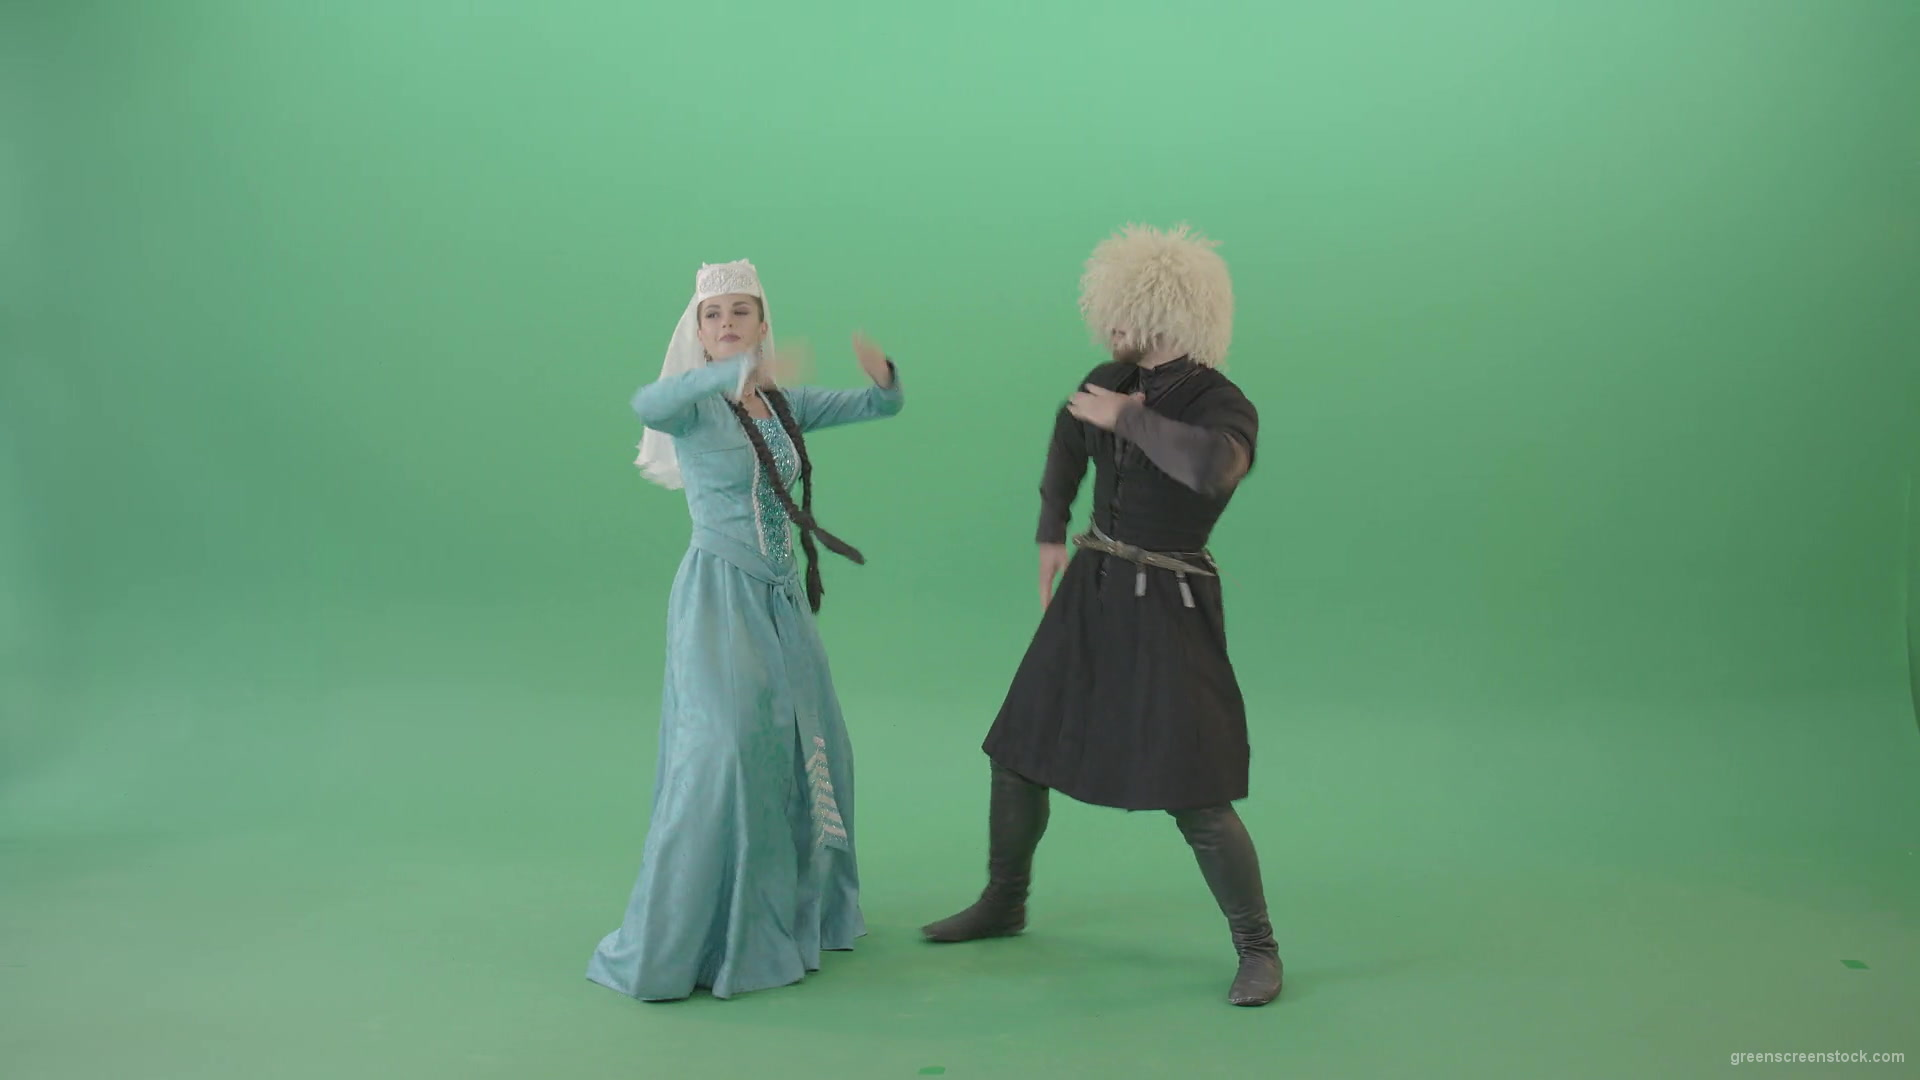 Gerogian-people-funny-dancing-with-smile-in-folk-dress-isolated-on-Green-Screen-4K-Video-Footage-1920_002 Green Screen Stock